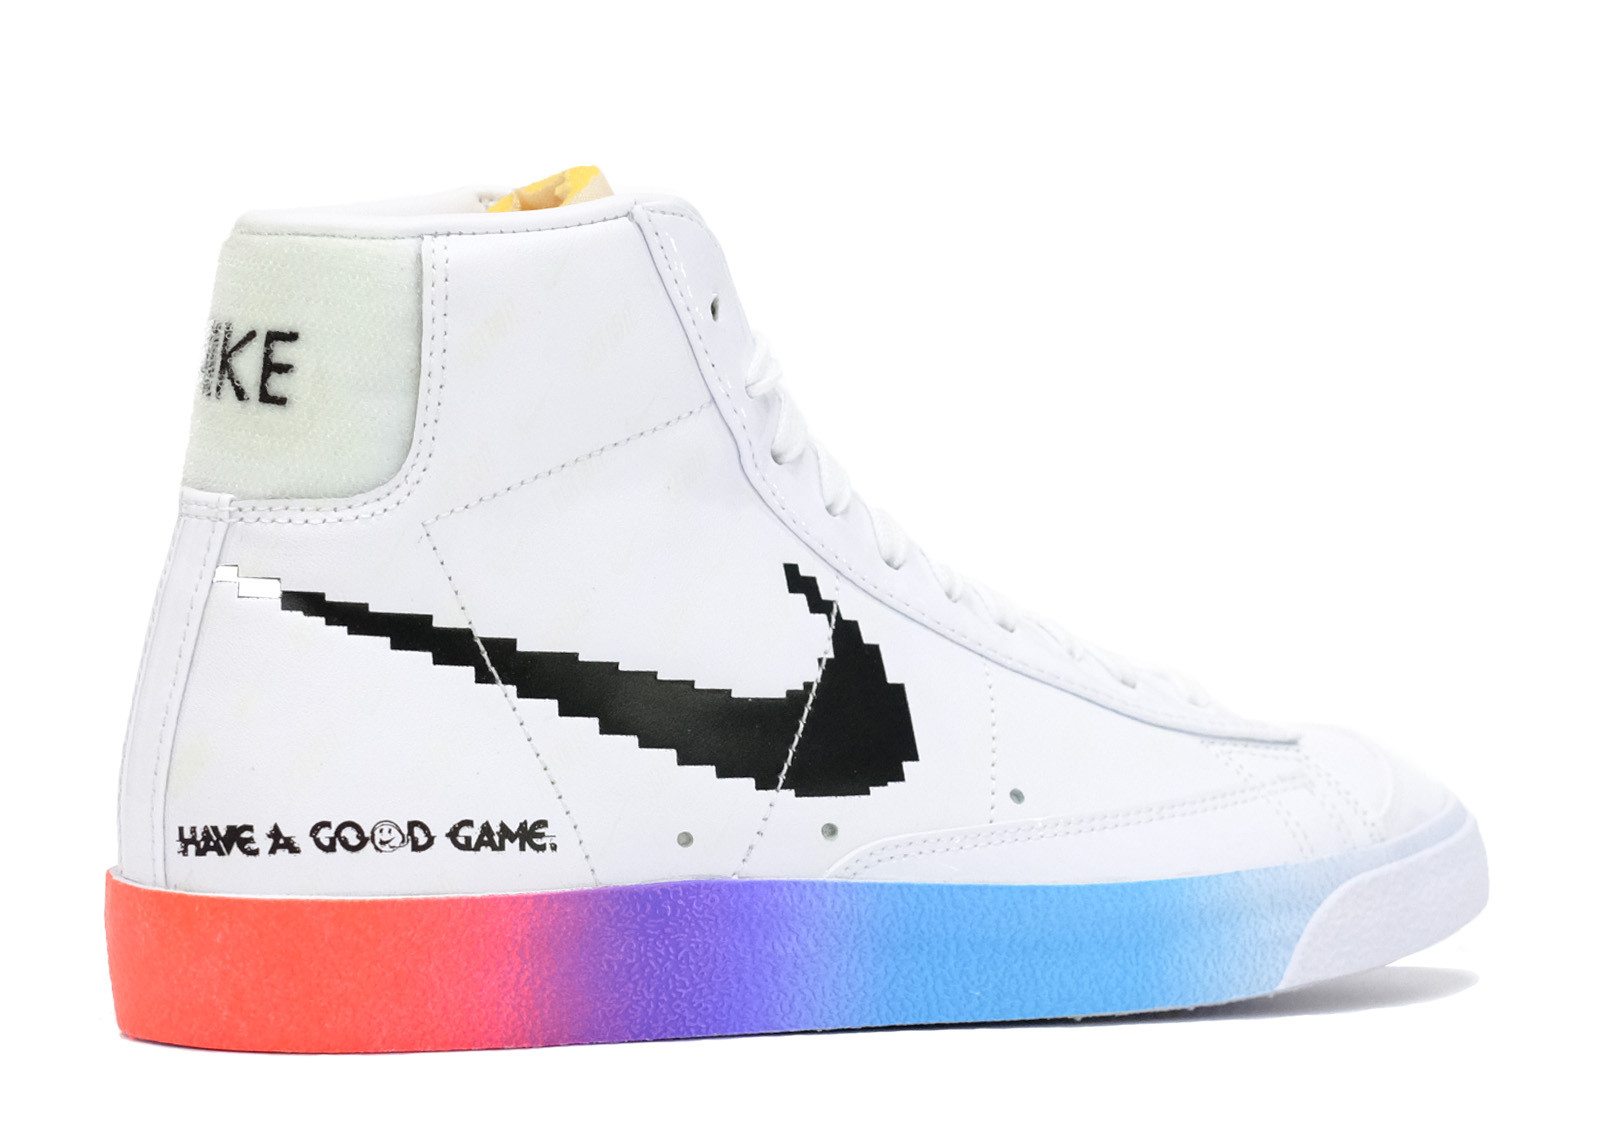 Nike BLAZER MID 77 HAVE A GOOD GAME image 2